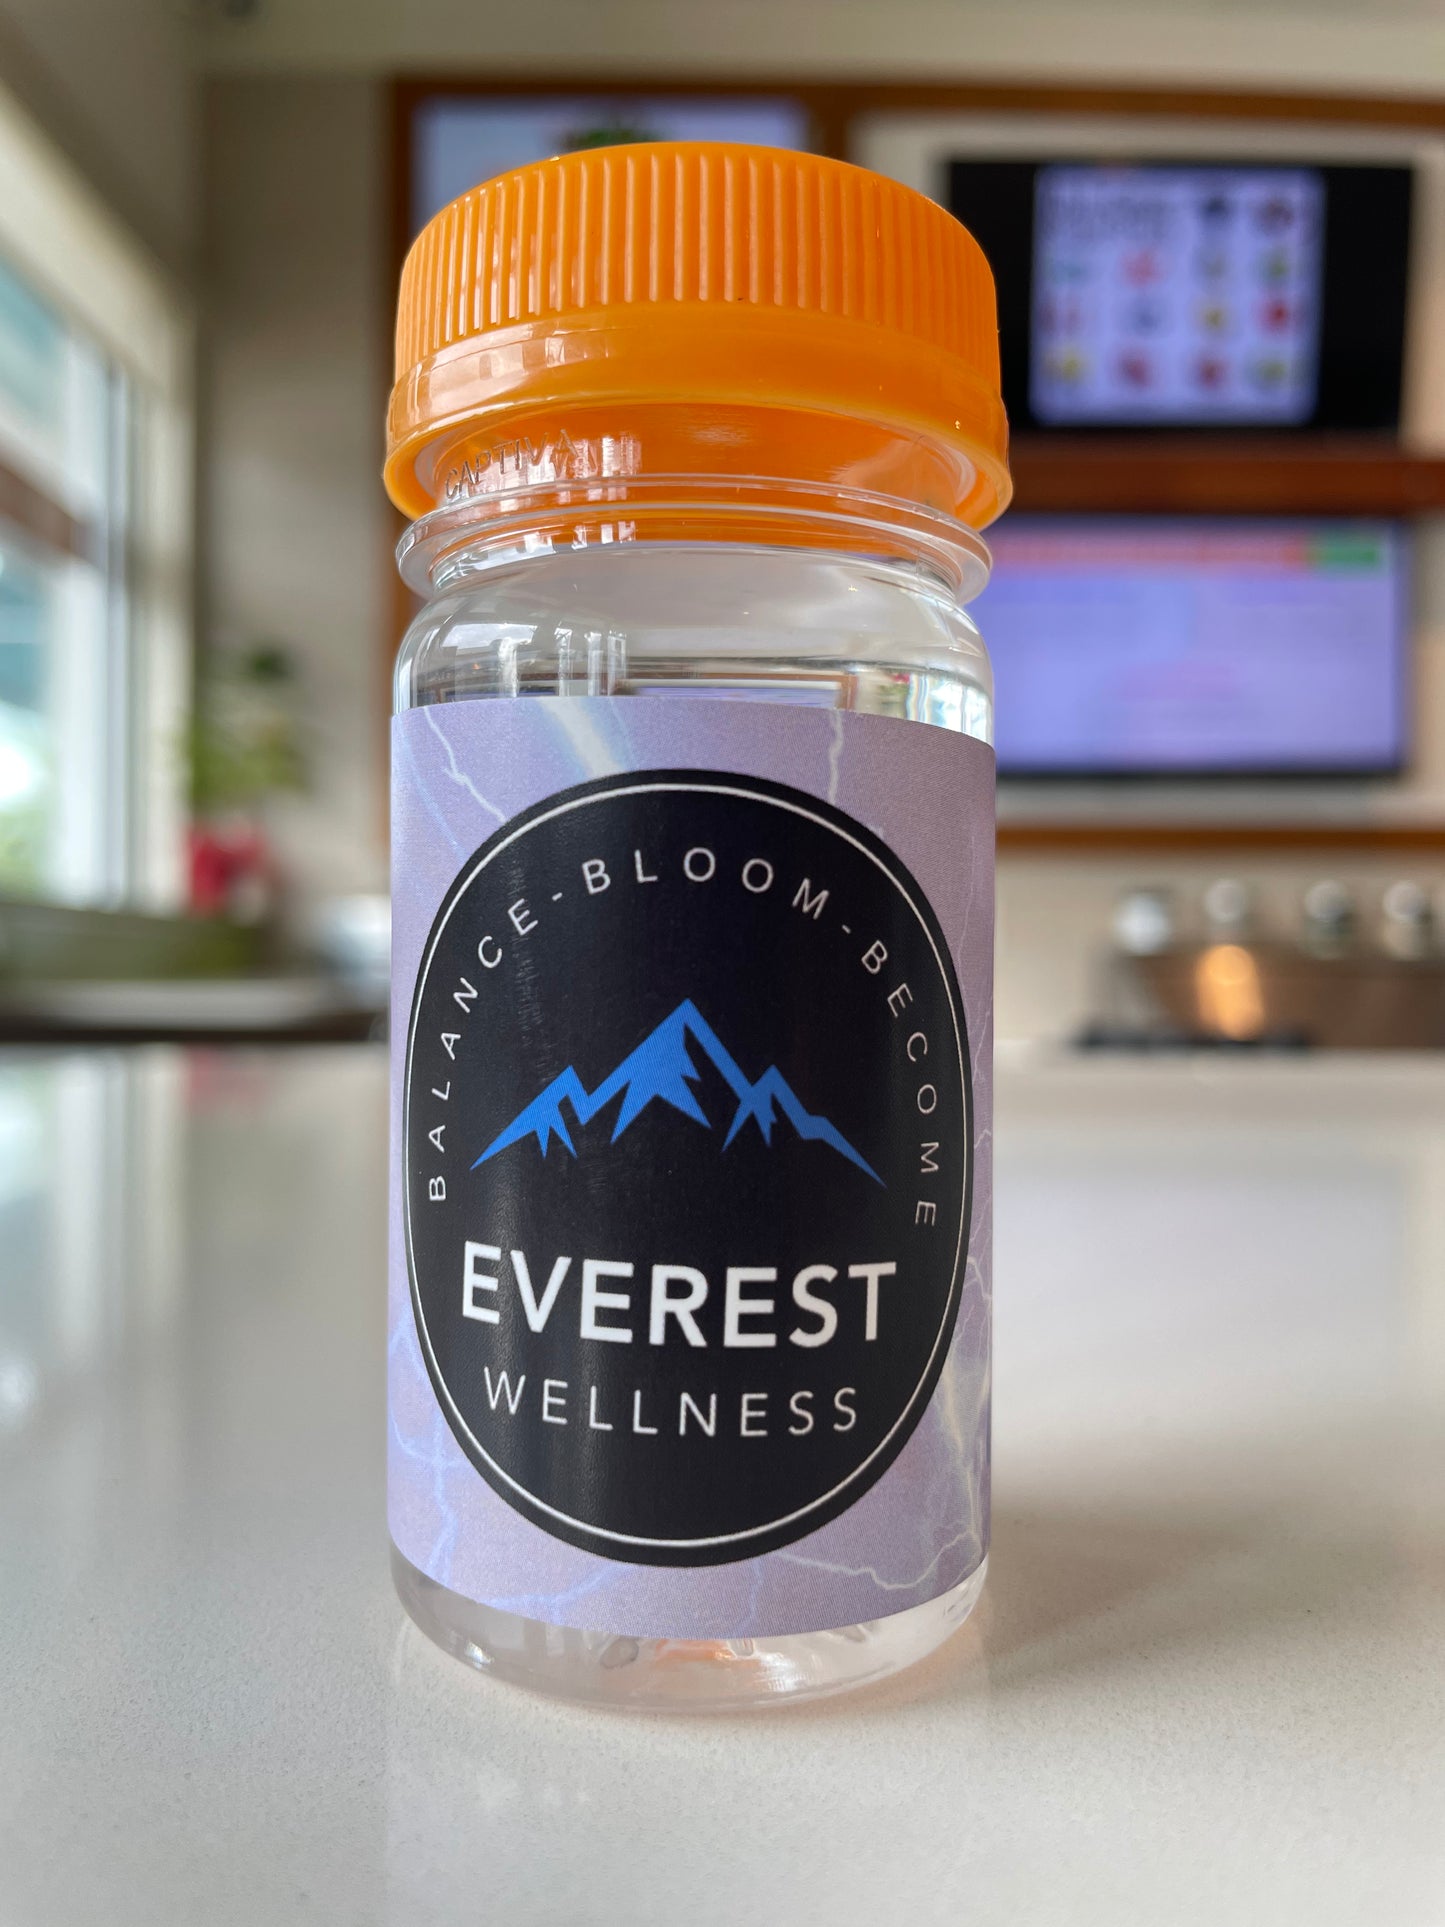 Everest Boost - Elevate Instantly - 12 Pack